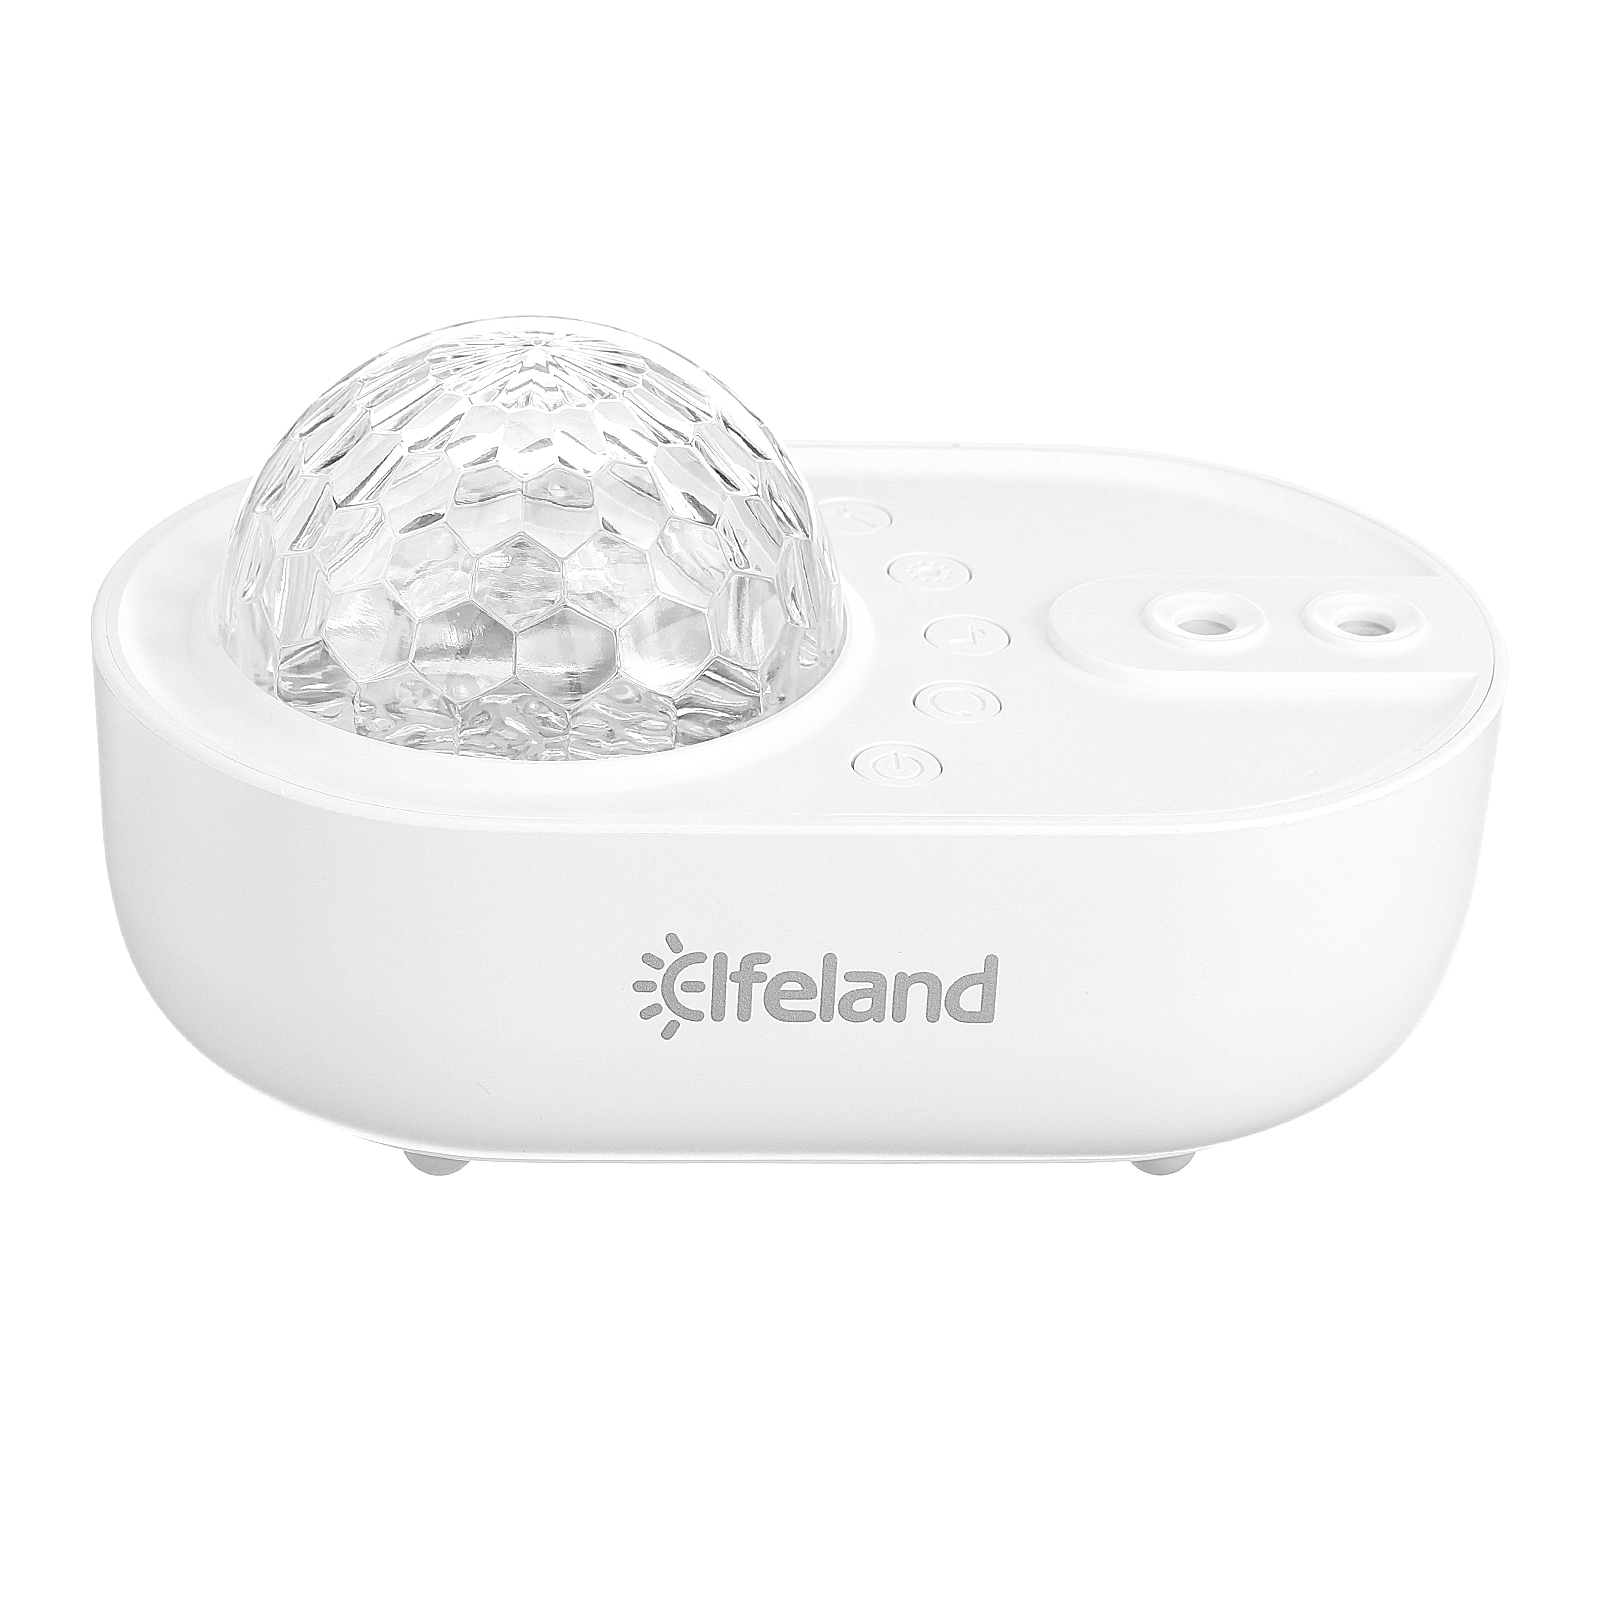 Elfeland-USB-LED-Starry-Light-Sky-Night-Galaxy-Projector-Music-Lamps-with-Remote-Control-1887025-14